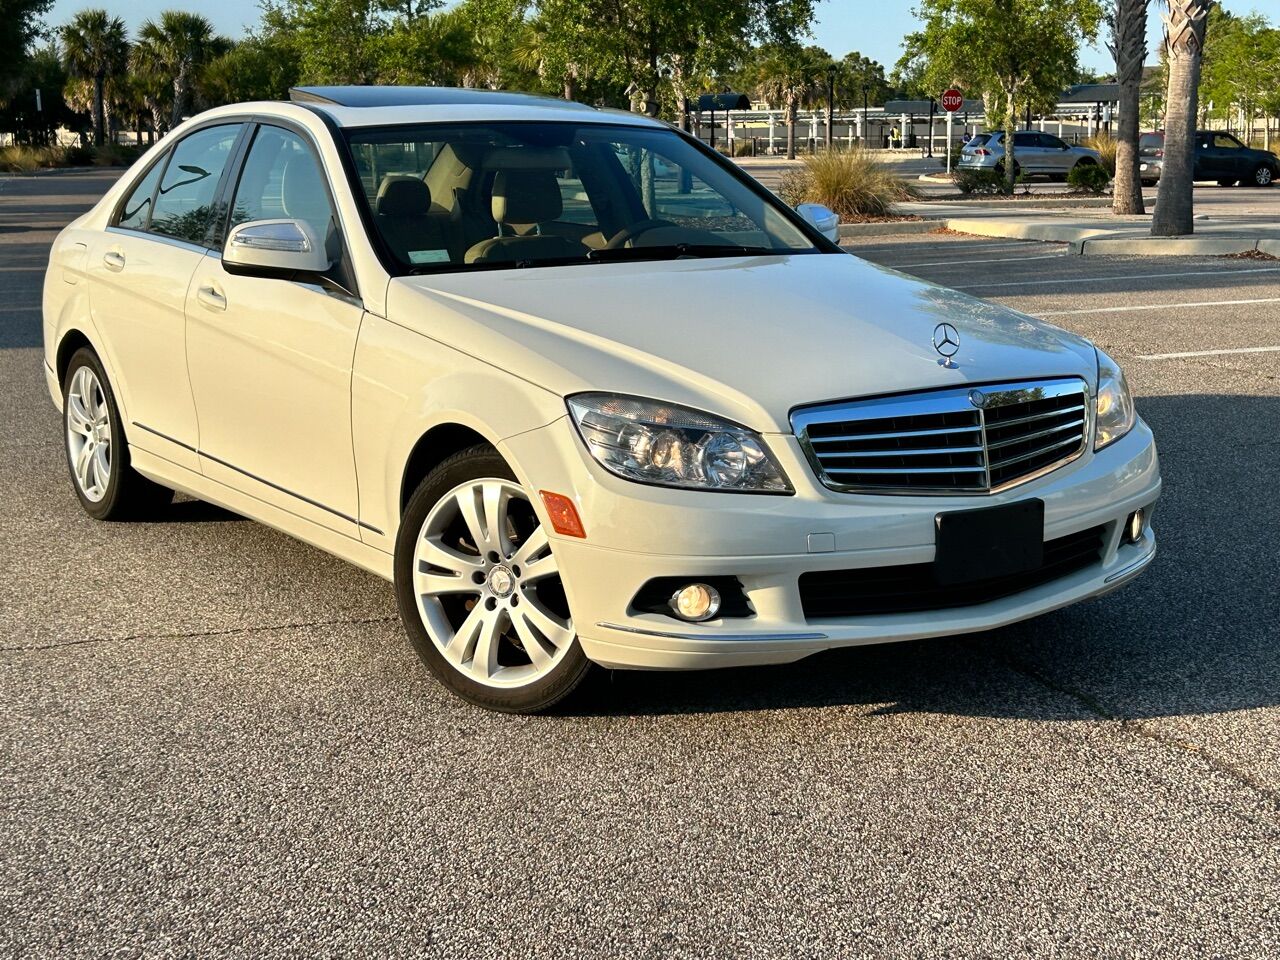 2008 Mercedes-Benz C-Class For Sale In Florida - Carsforsale.com®